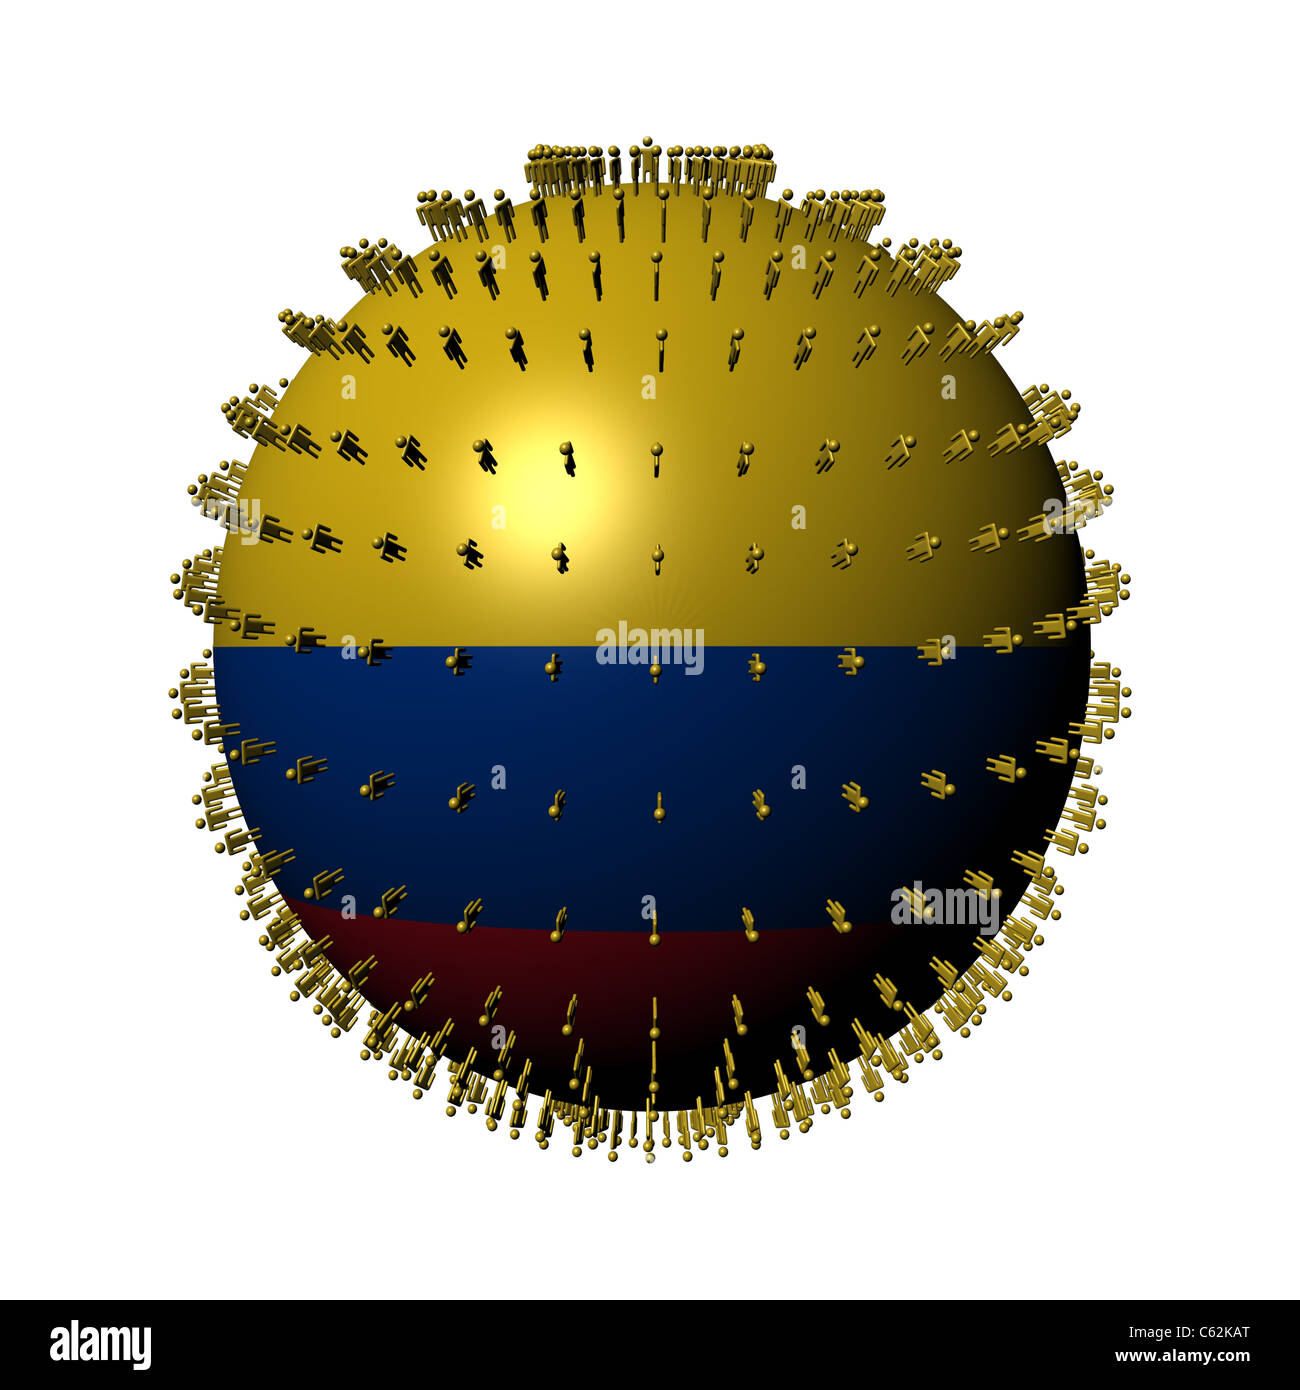 Colombia flag sphere surrounded by people illustration Stock Photo